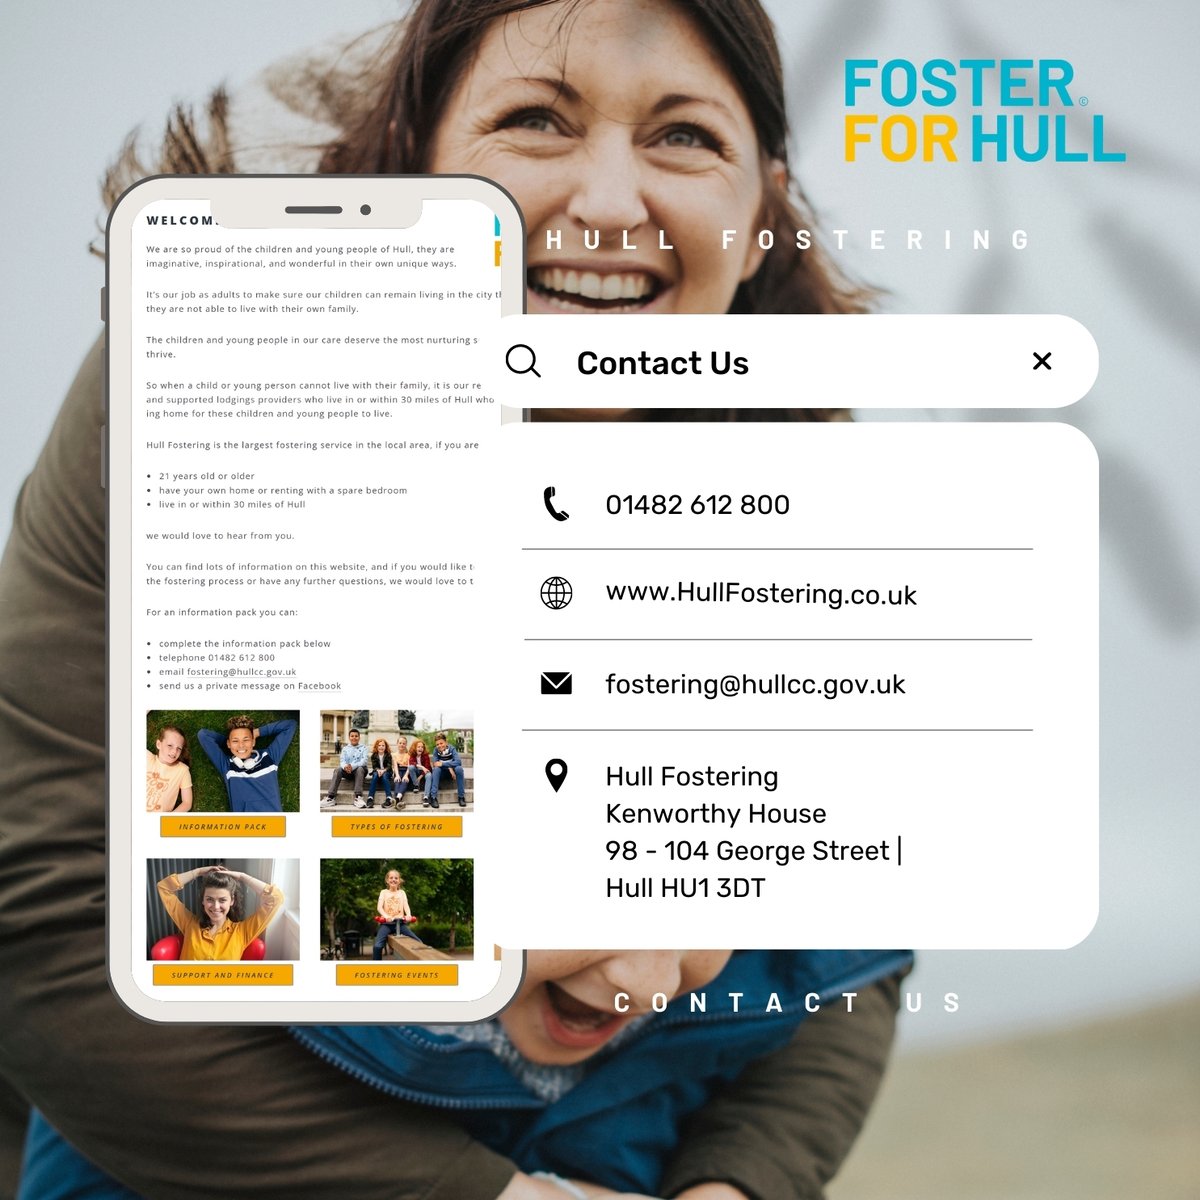 Could You Foster? Get in touch with Hull Fostering or visit their website HullFostering.co.uk

#FosteringCommunities #HullFostering #CouldYouFoster